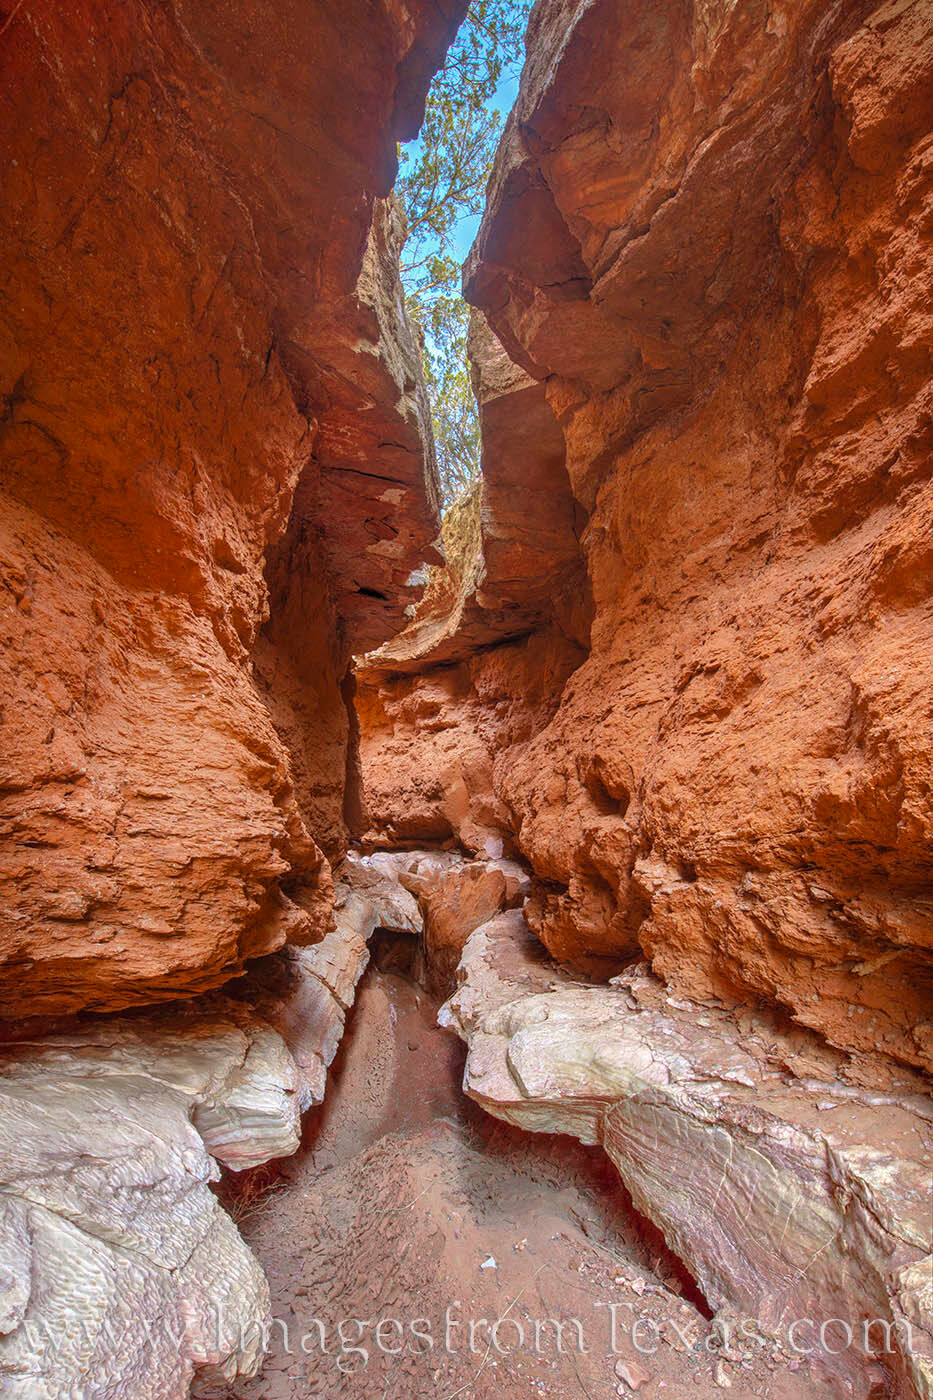 Tunnel Slot Canyon is a beautiful canyon made of quartermaster sandstone and gypsum.